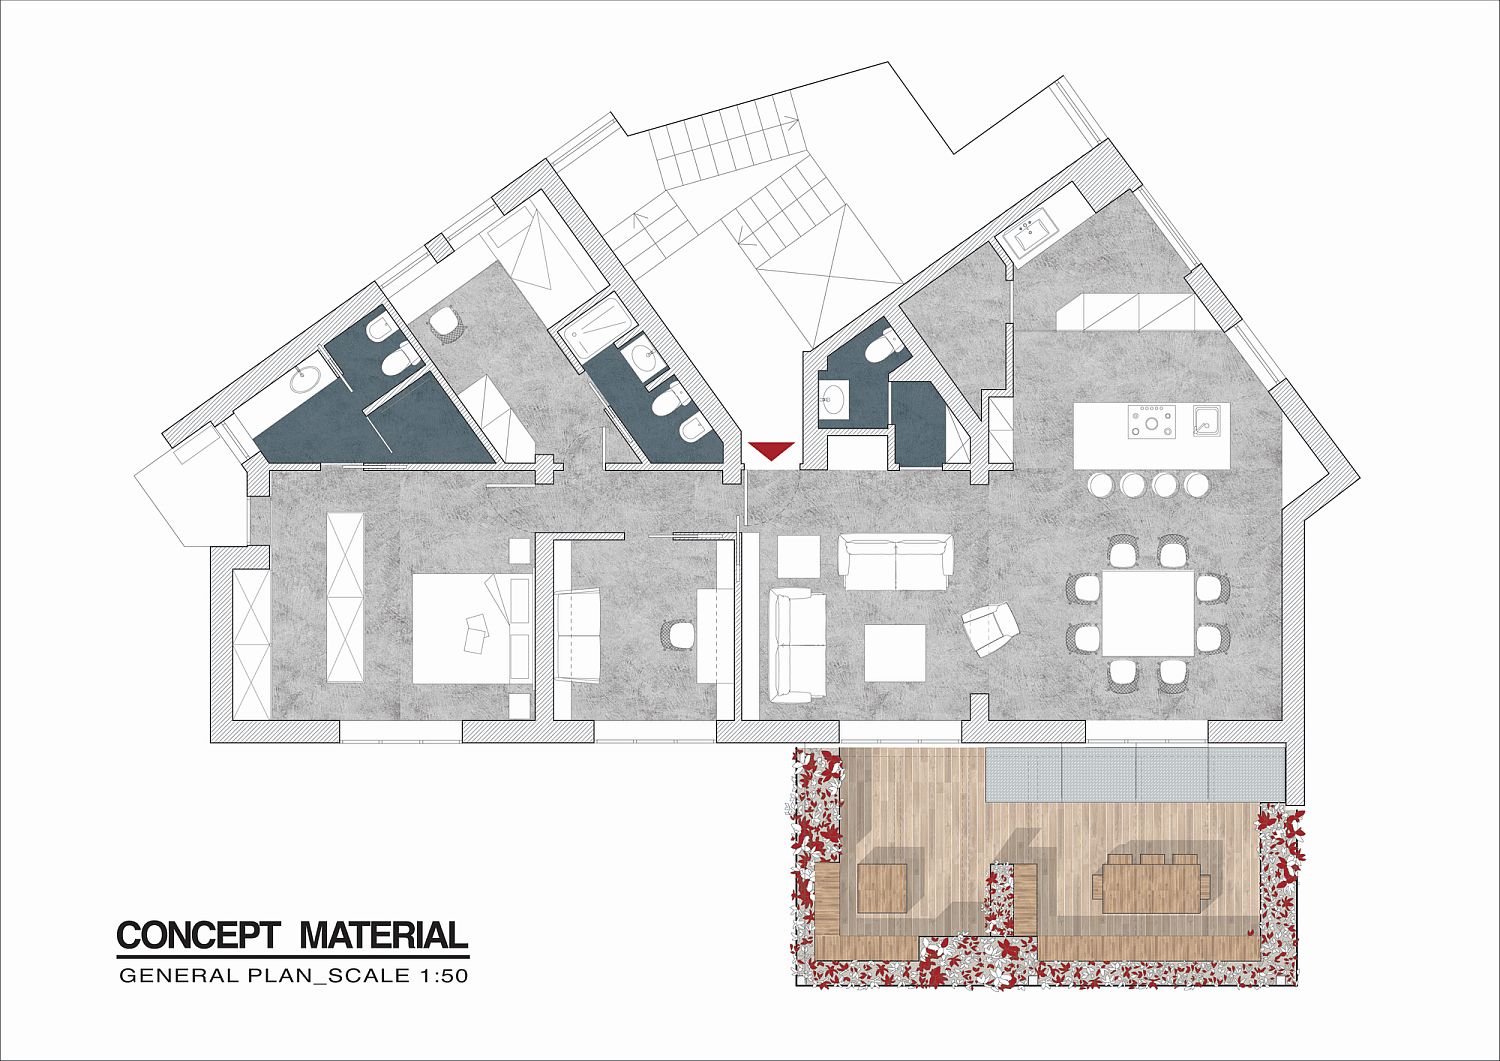 Floor plan of contemporary Hemingway Martini Apartment in Italy with revamped interior